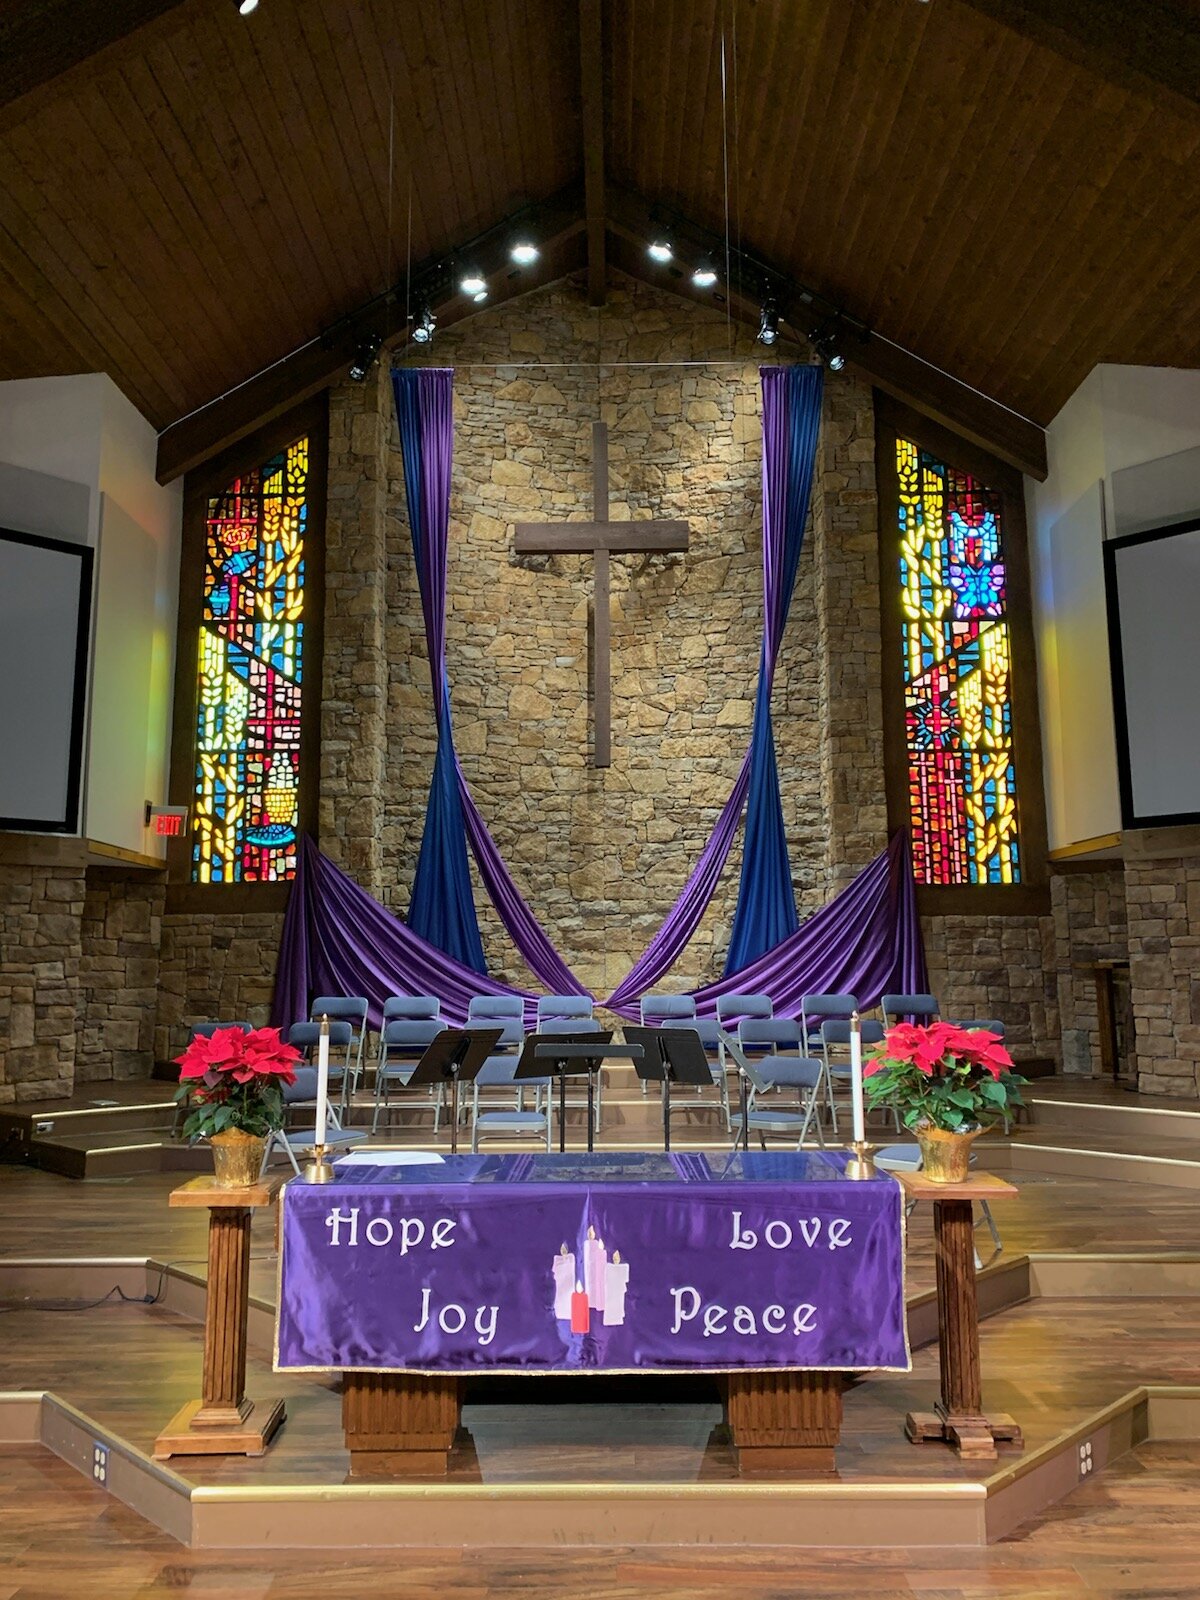 The sanctuary at Advent